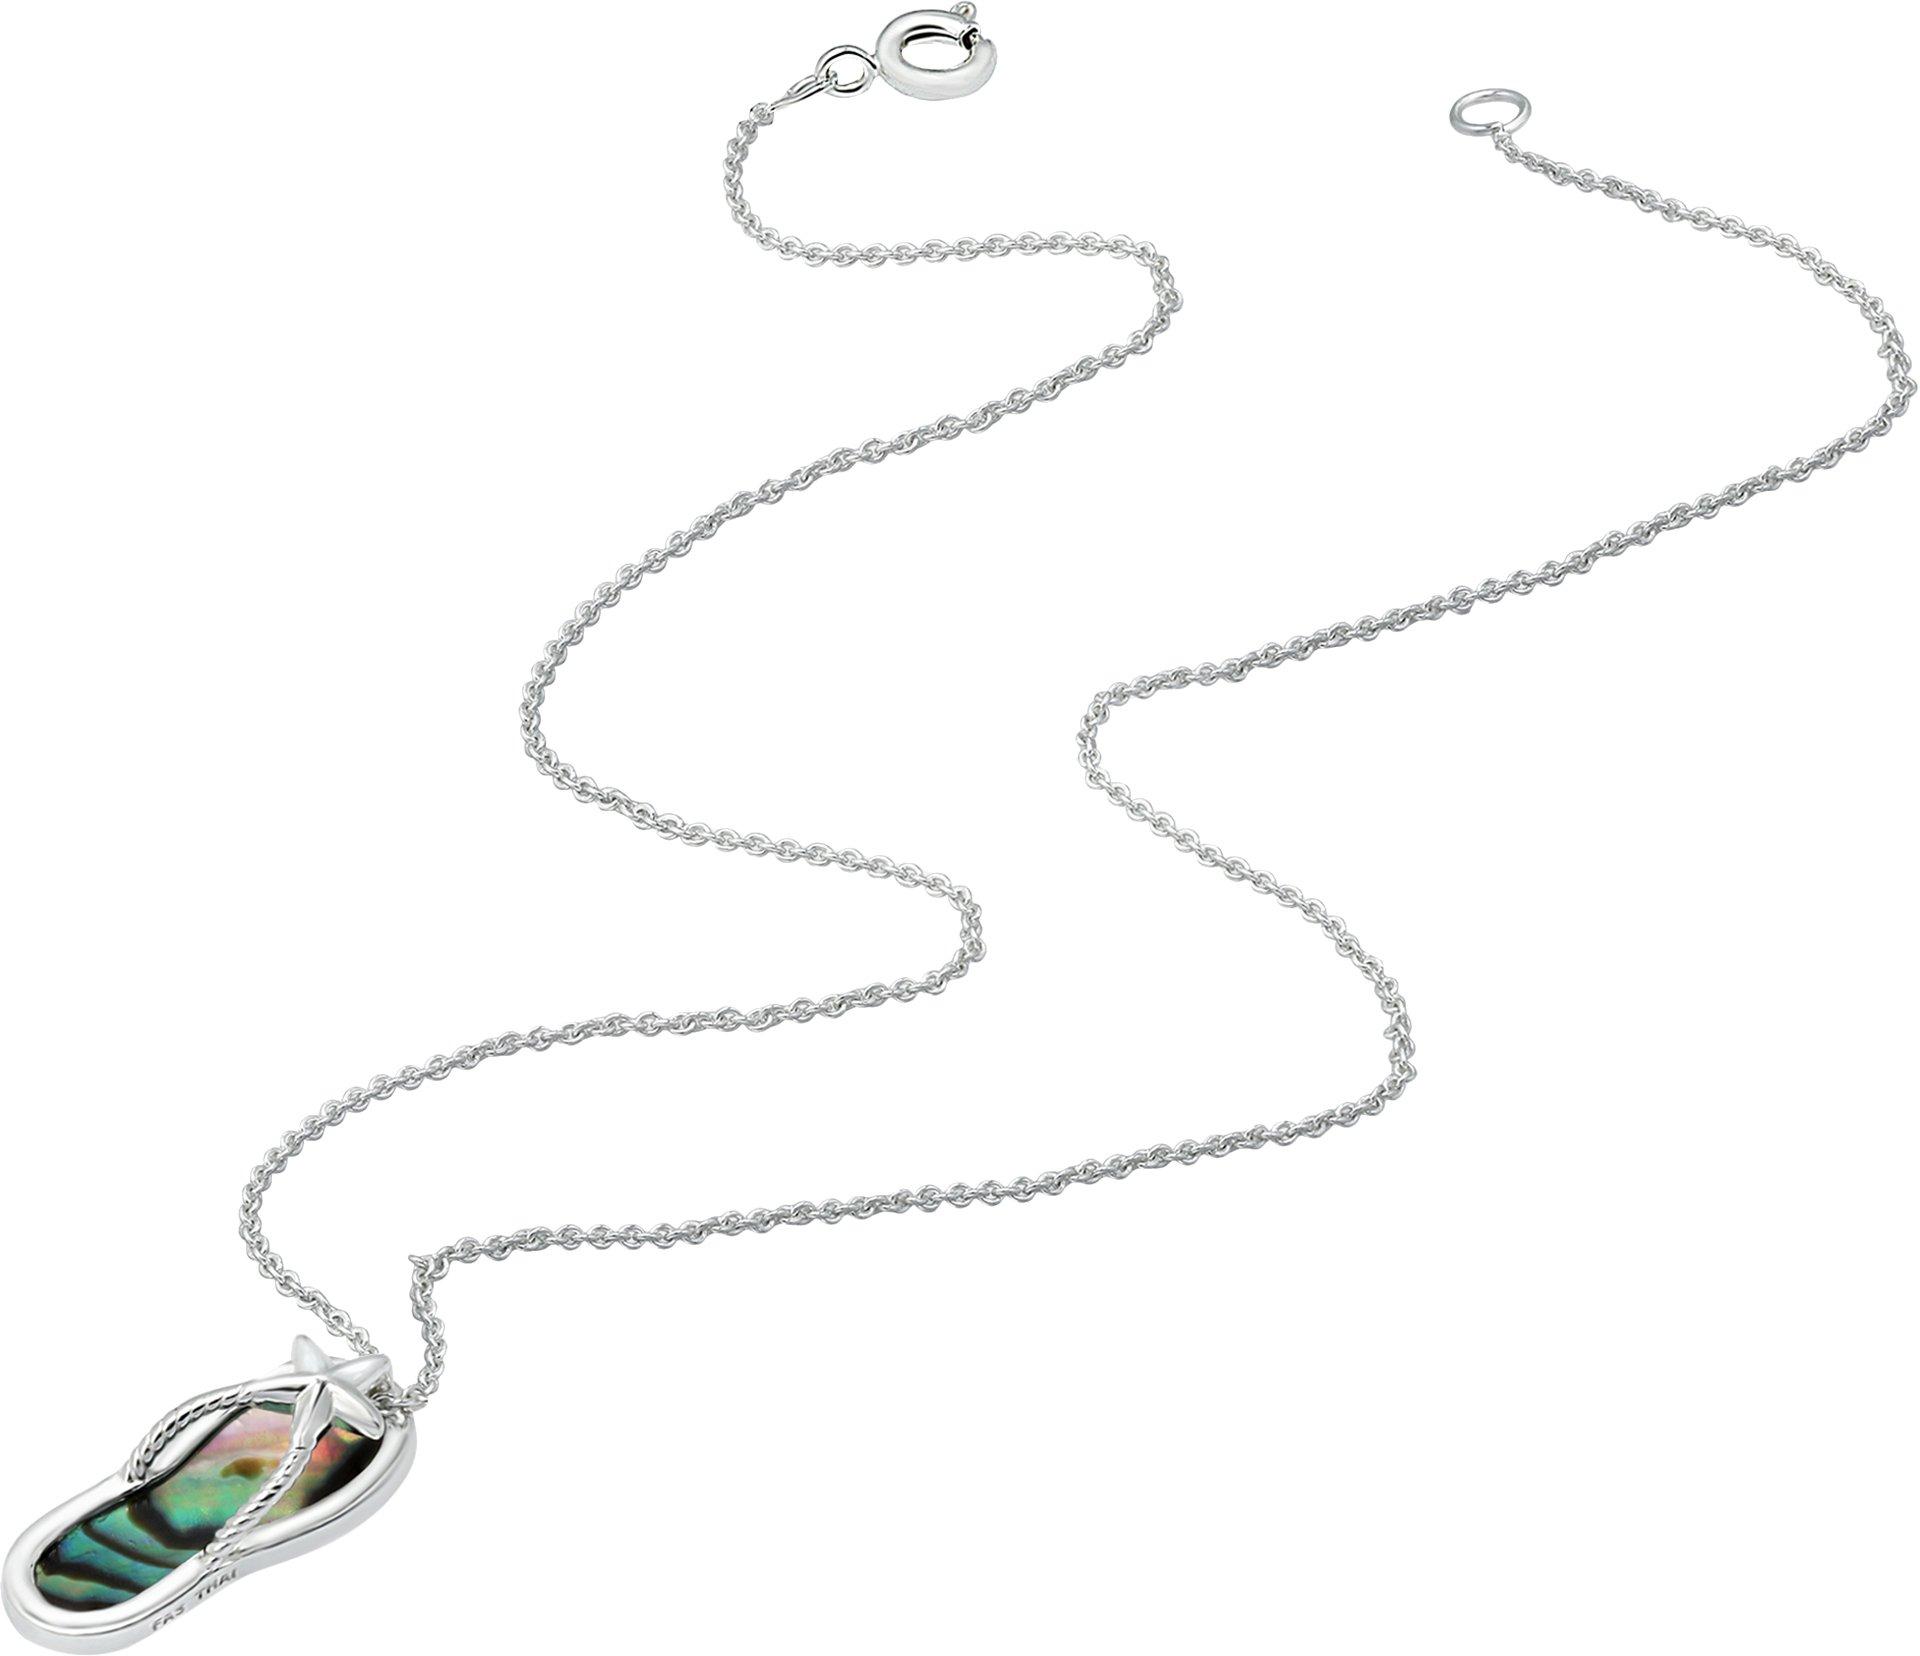 Beach Chic Silver Plated Abalone Flip Flop Necklace